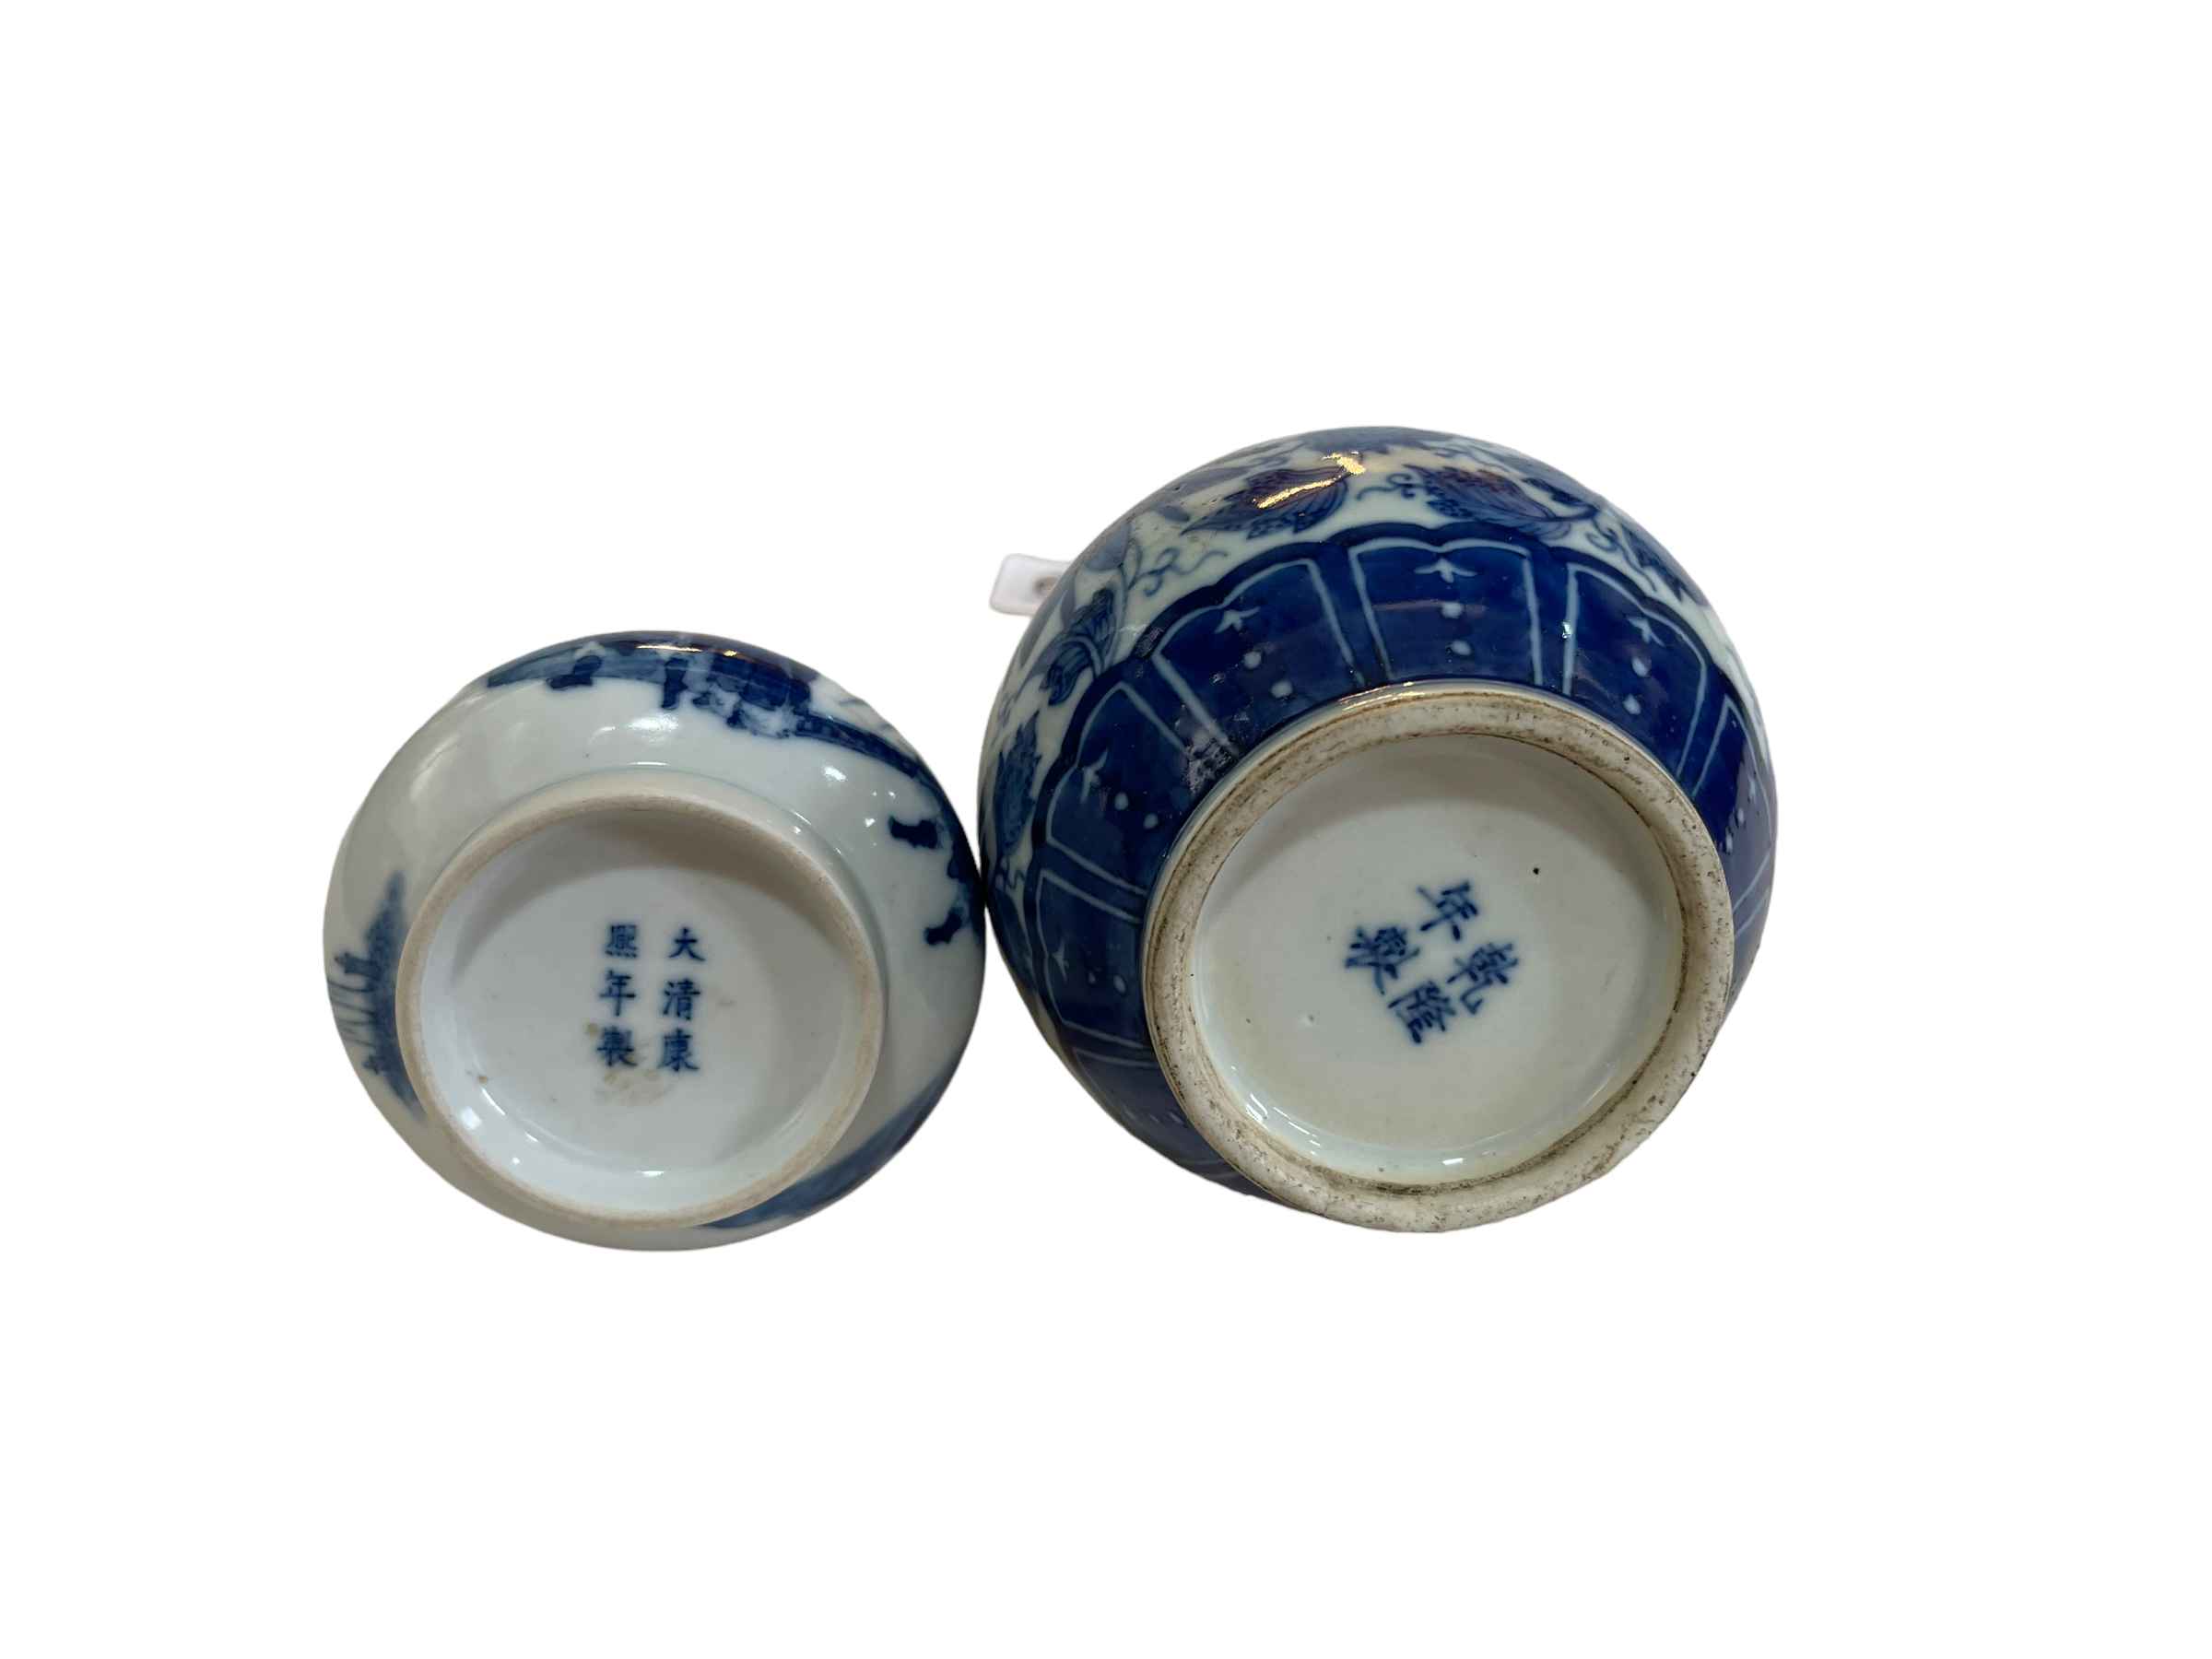 Chinese blue and white double gourd vase and small Chinese blue and white bowl (2). - Image 2 of 2